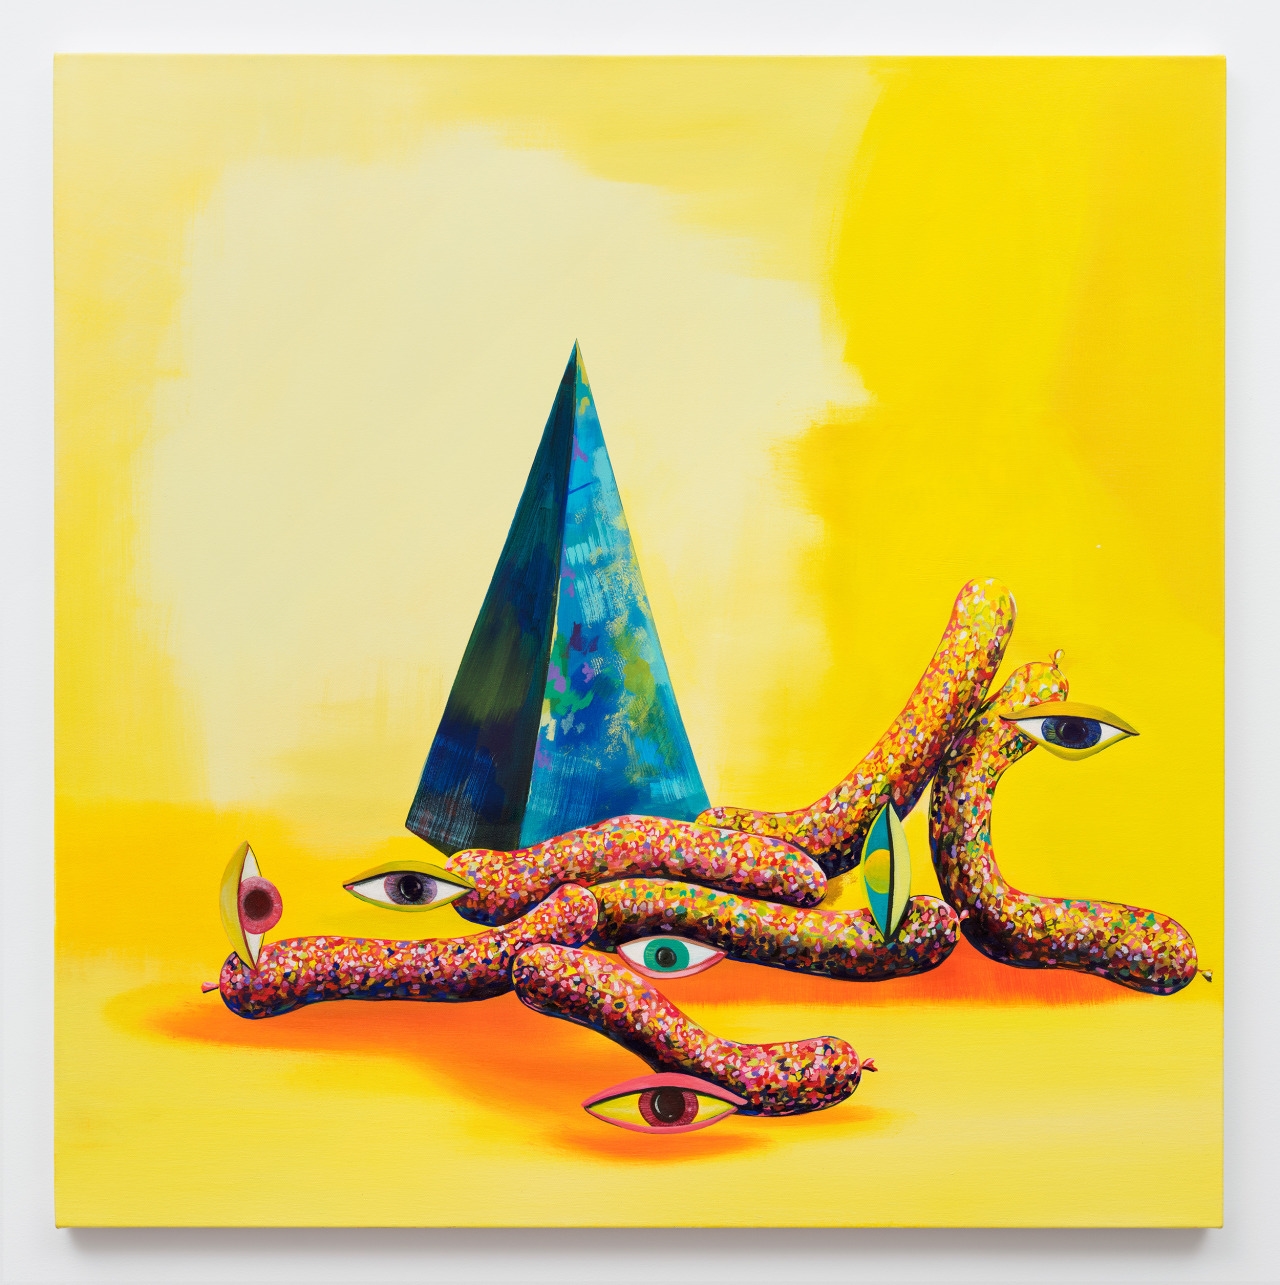   Untitled, Sausage-yes , (Yellow), 2015  Oil on canvas  40 x 40 inches&nbsp;    